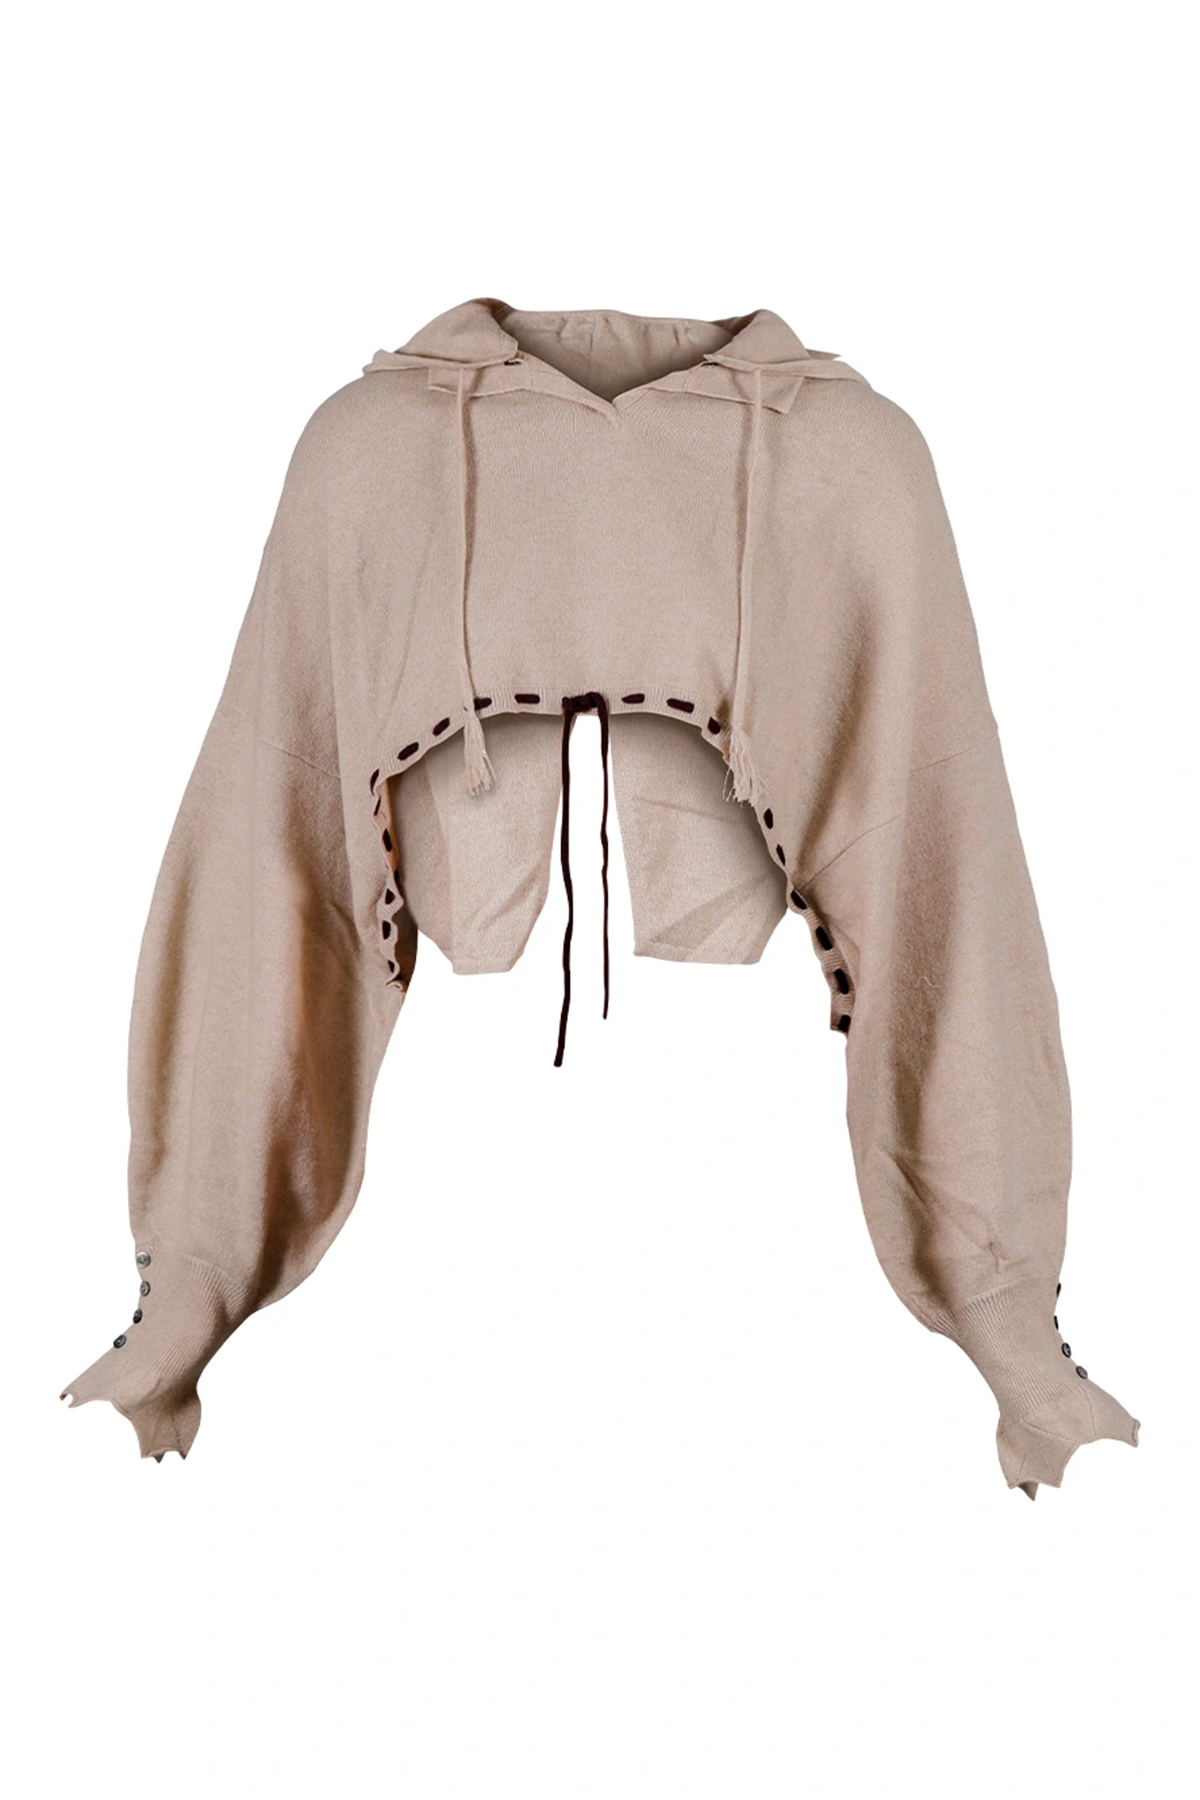 Cashmere Crop top with Detachable Hoodie